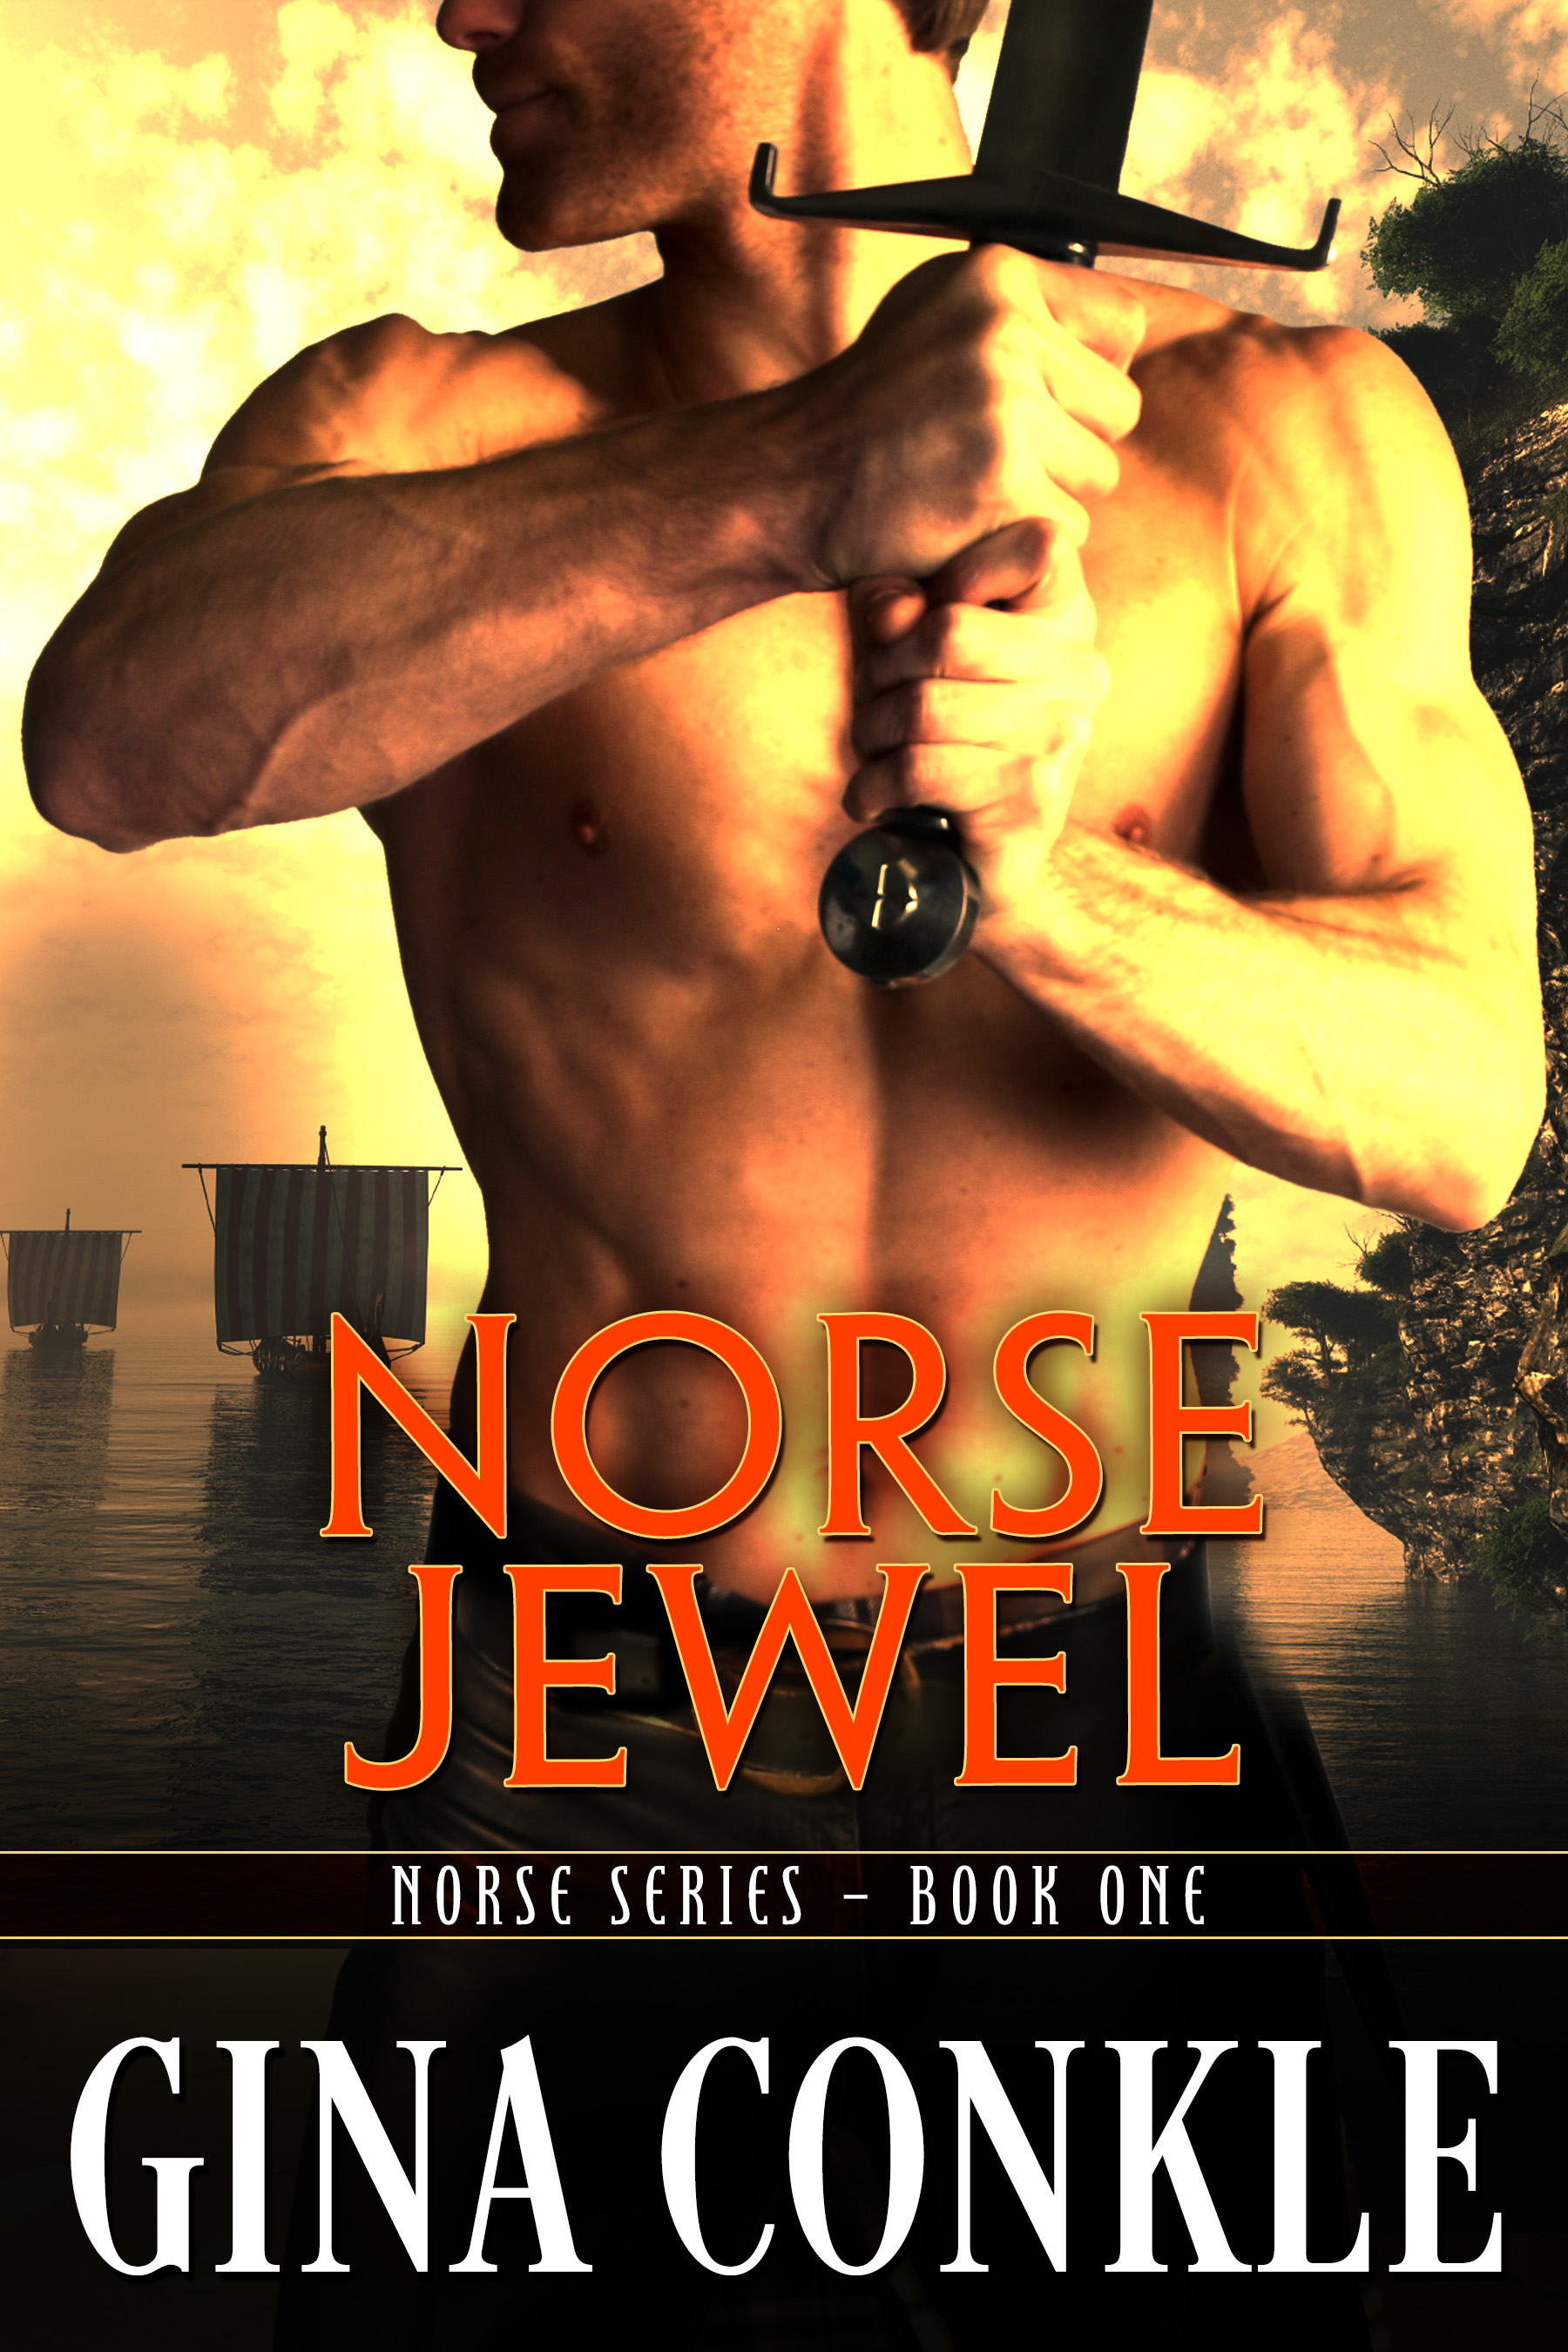 Norse Jewel on Sale 99 cents!